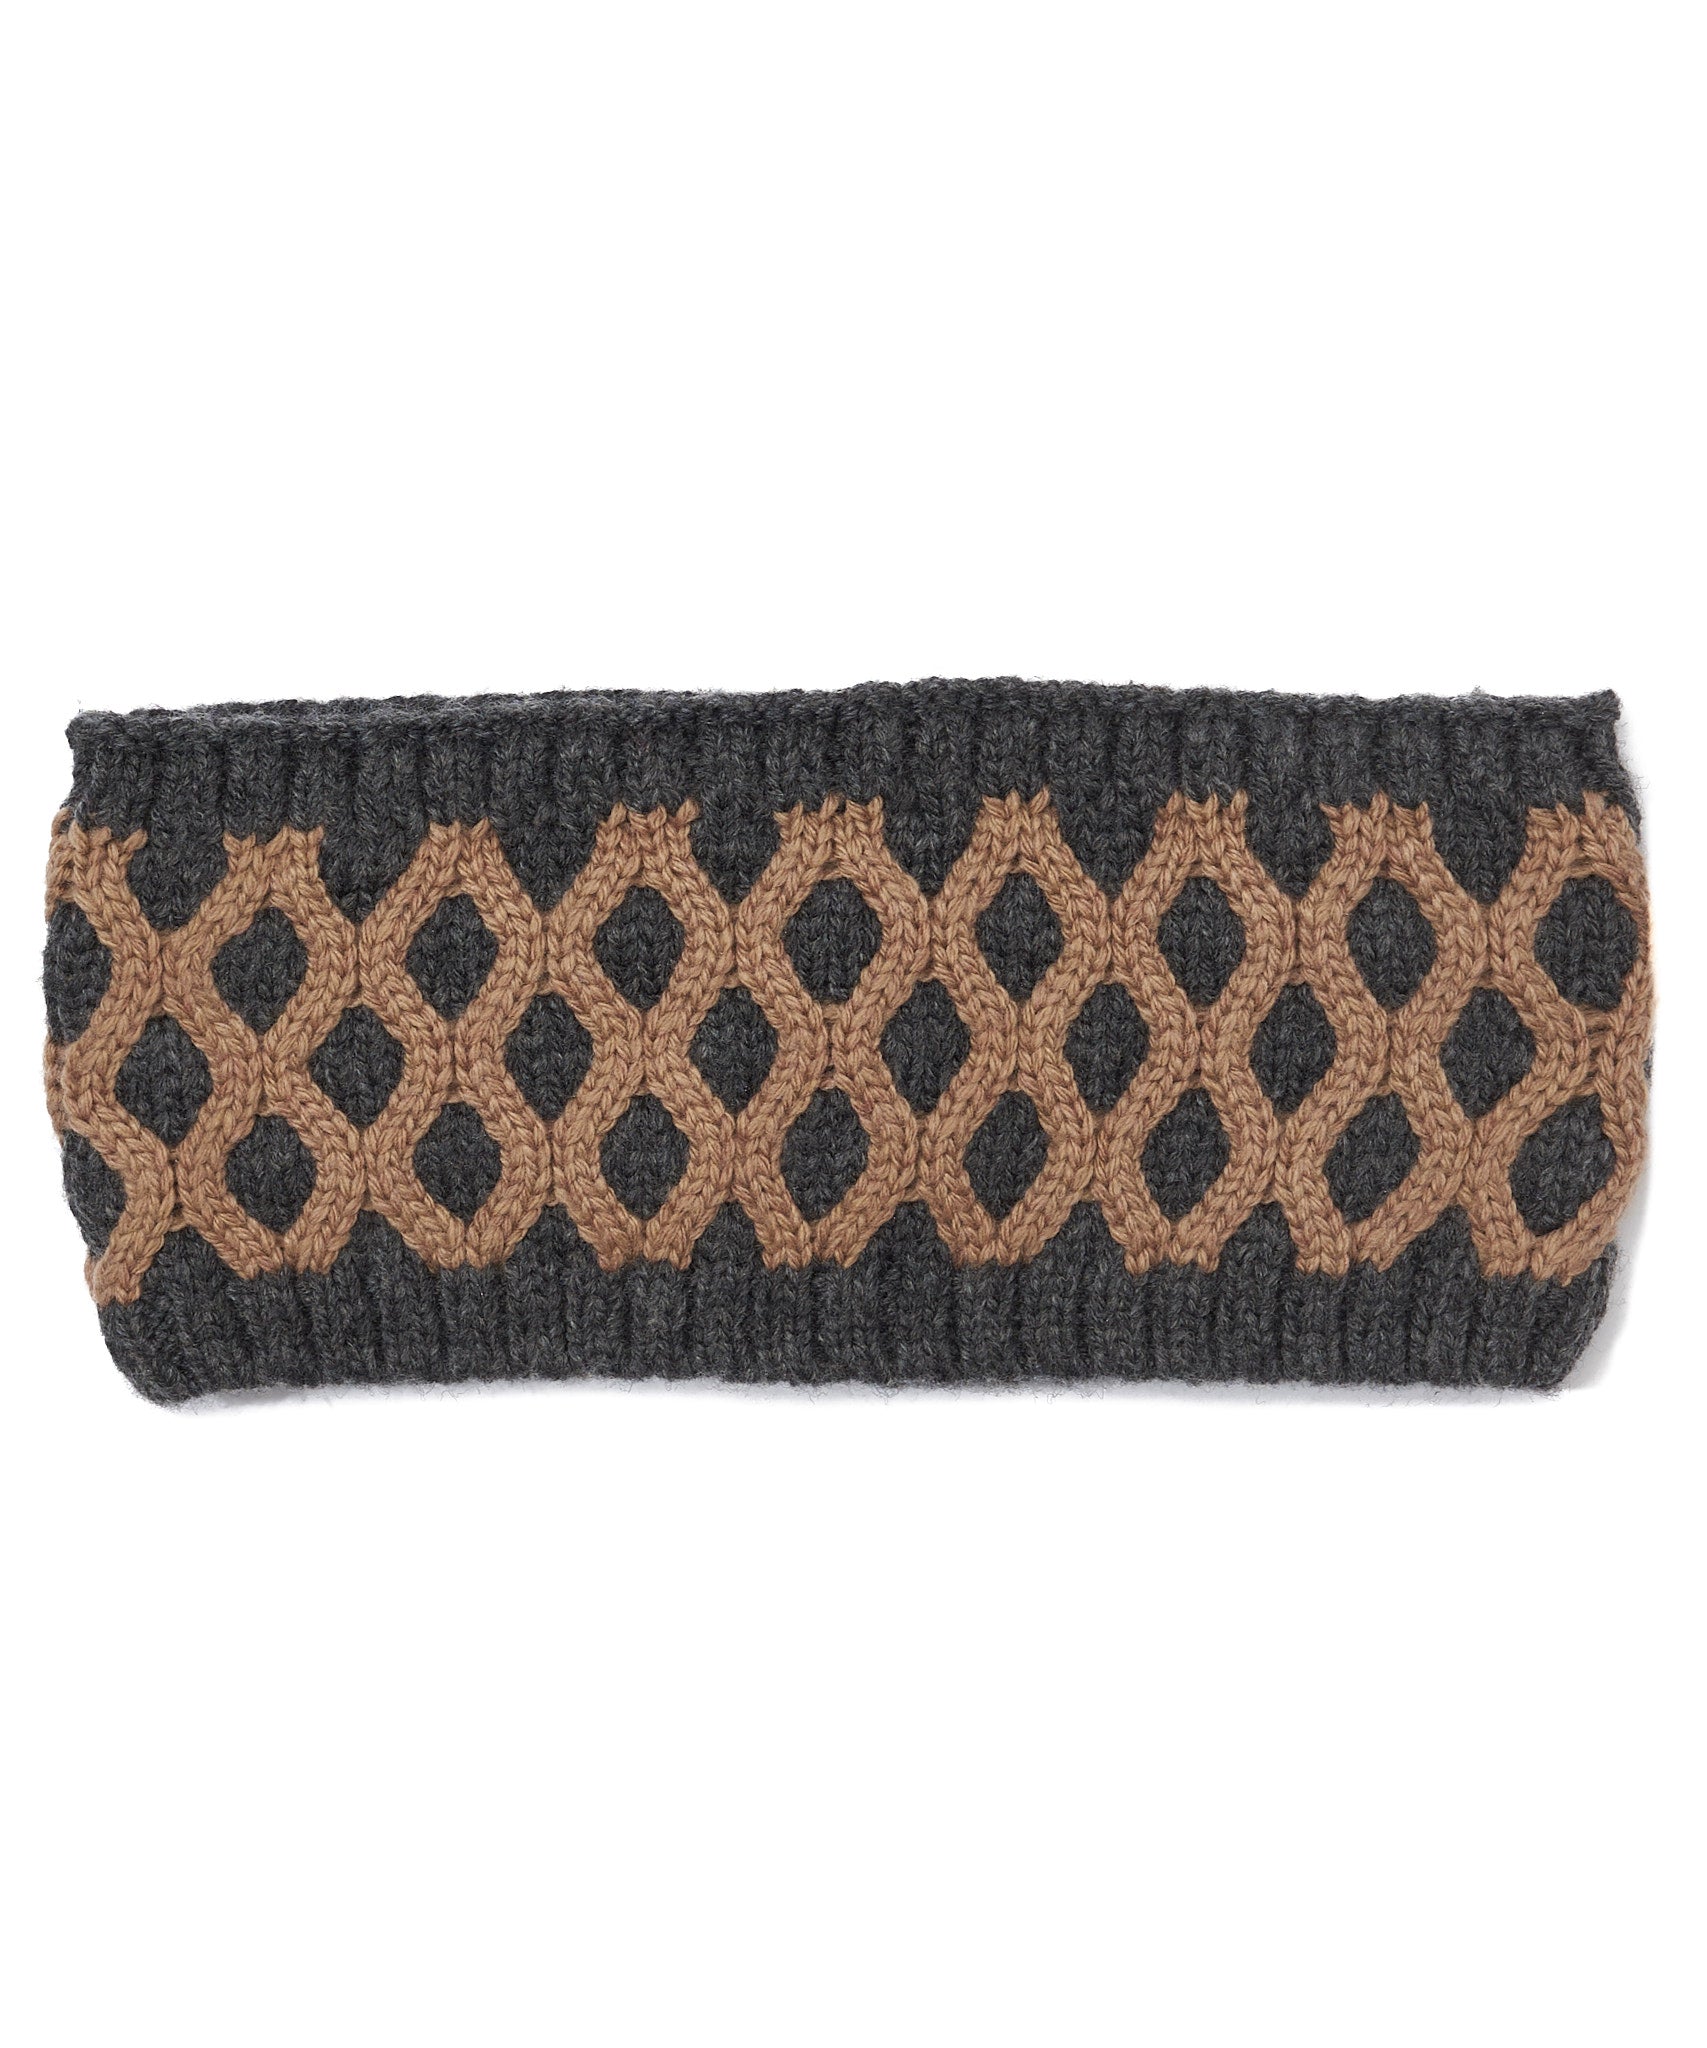 Recycled Bi-color Honeycomb Headband in color Charcoal